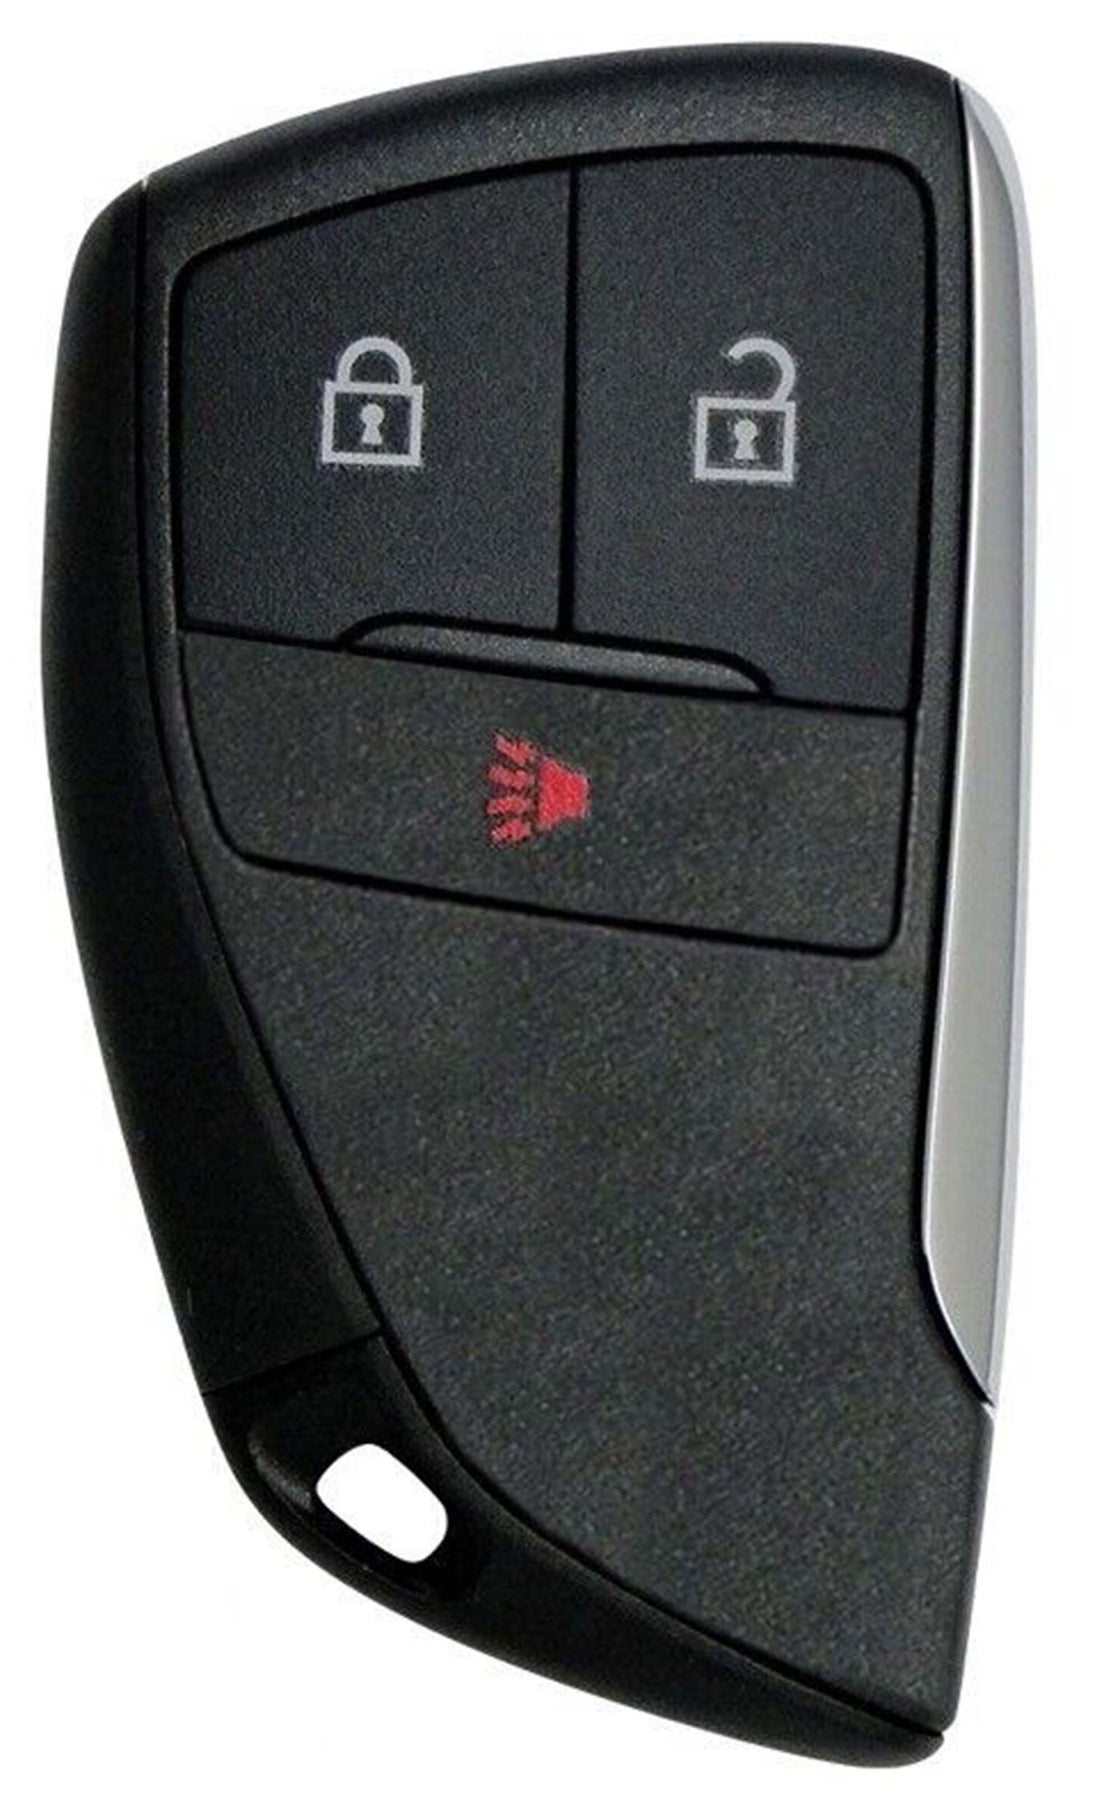 1x New Replacement Proximity Key Fob Compatible with & fit for Select Chevy Silverado GMC Sierra - YG0G21TB2-25